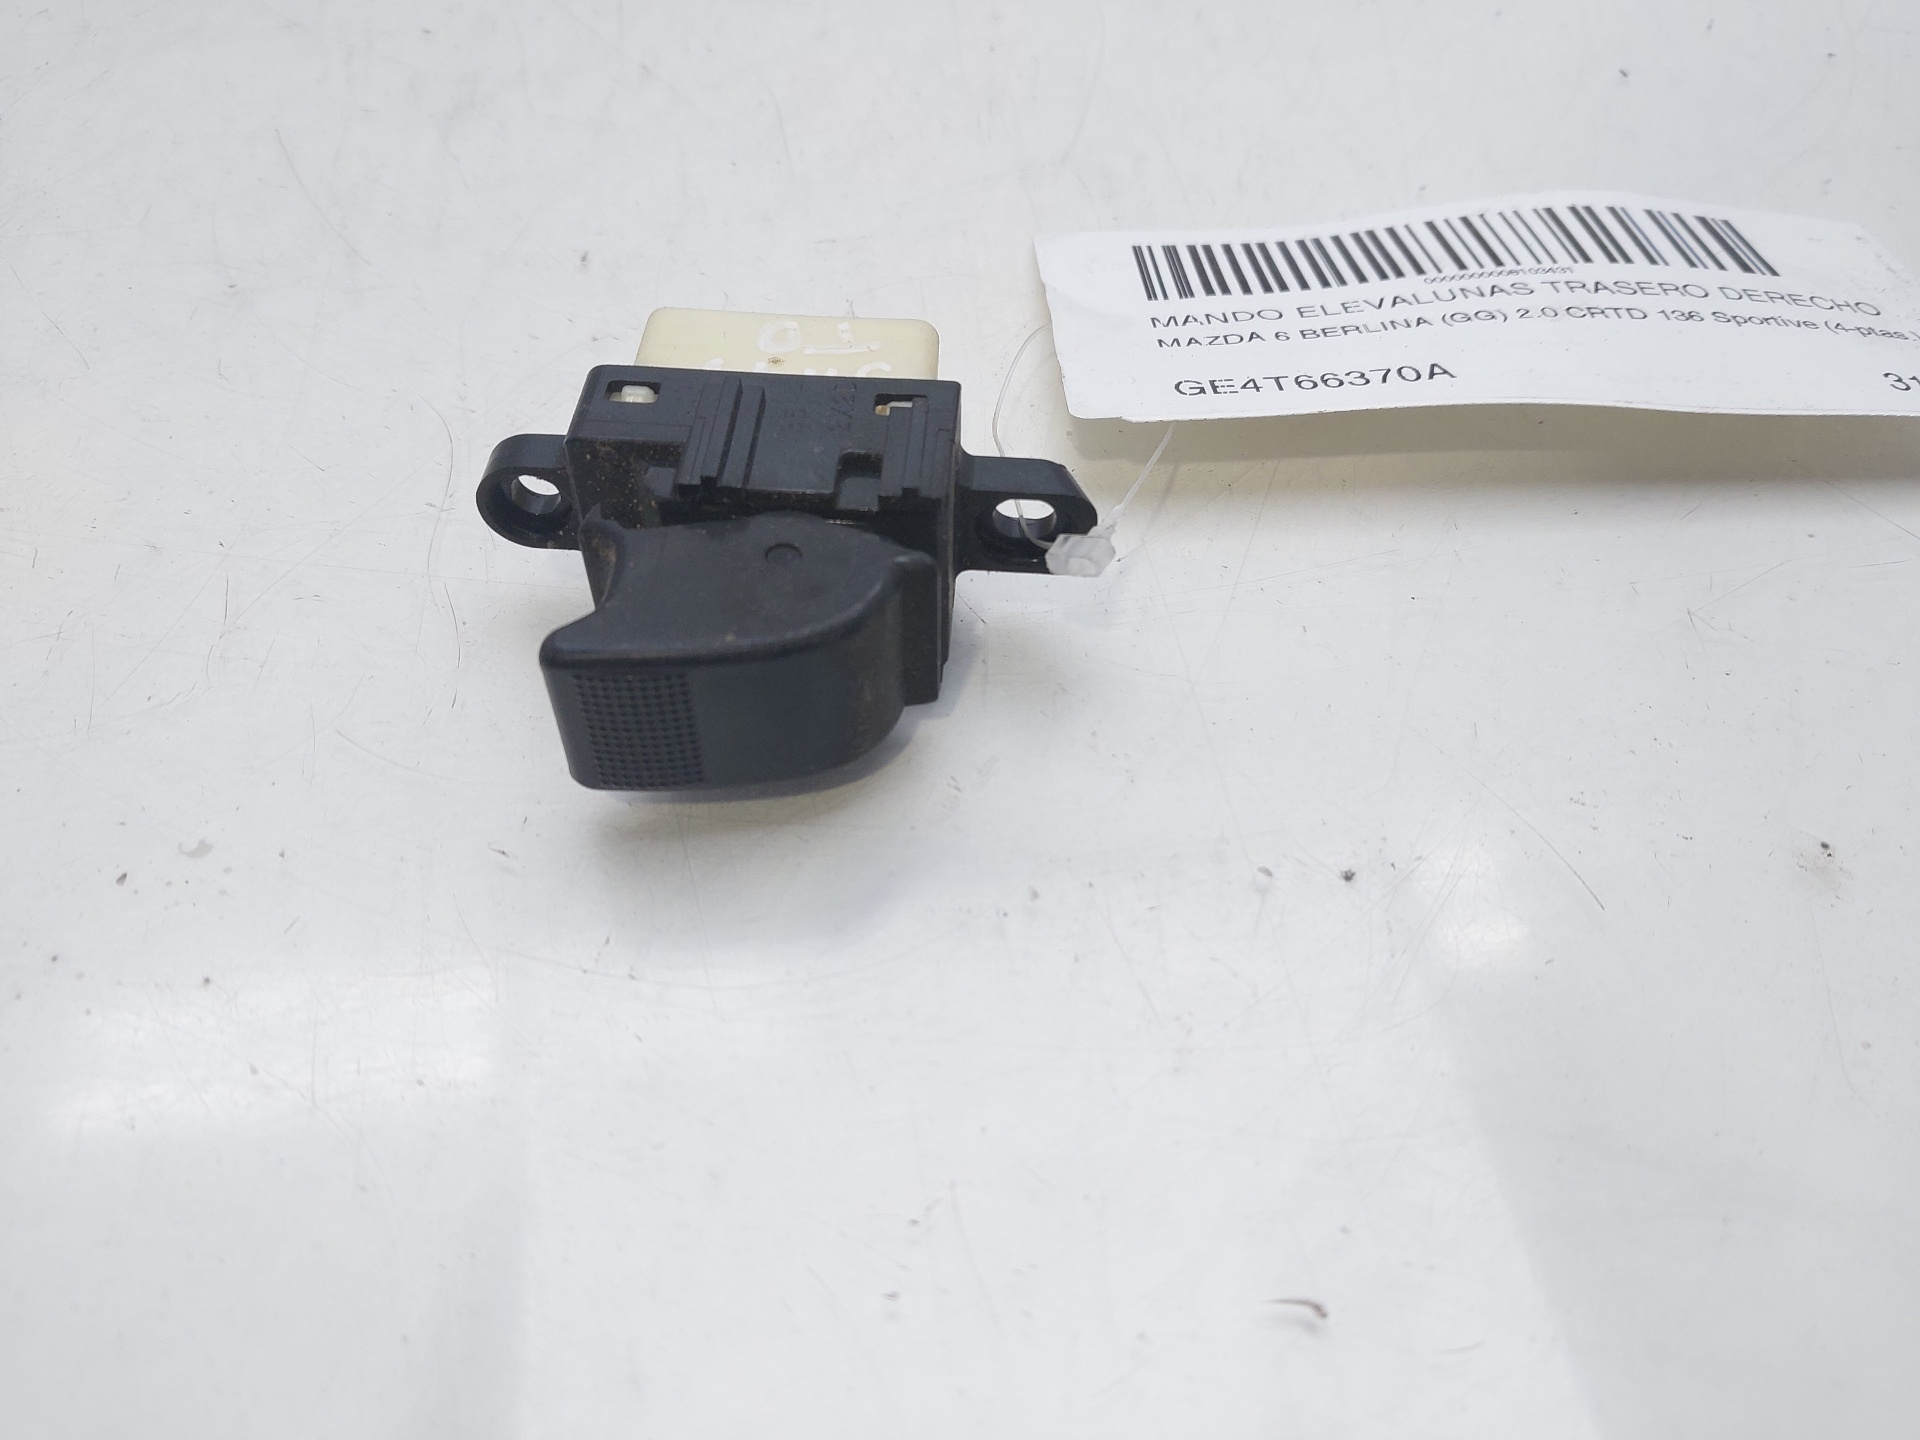 MAZDA 6 GG (2002-2007) Rear Right Door Window Control Switch GE4T66370A 20150990